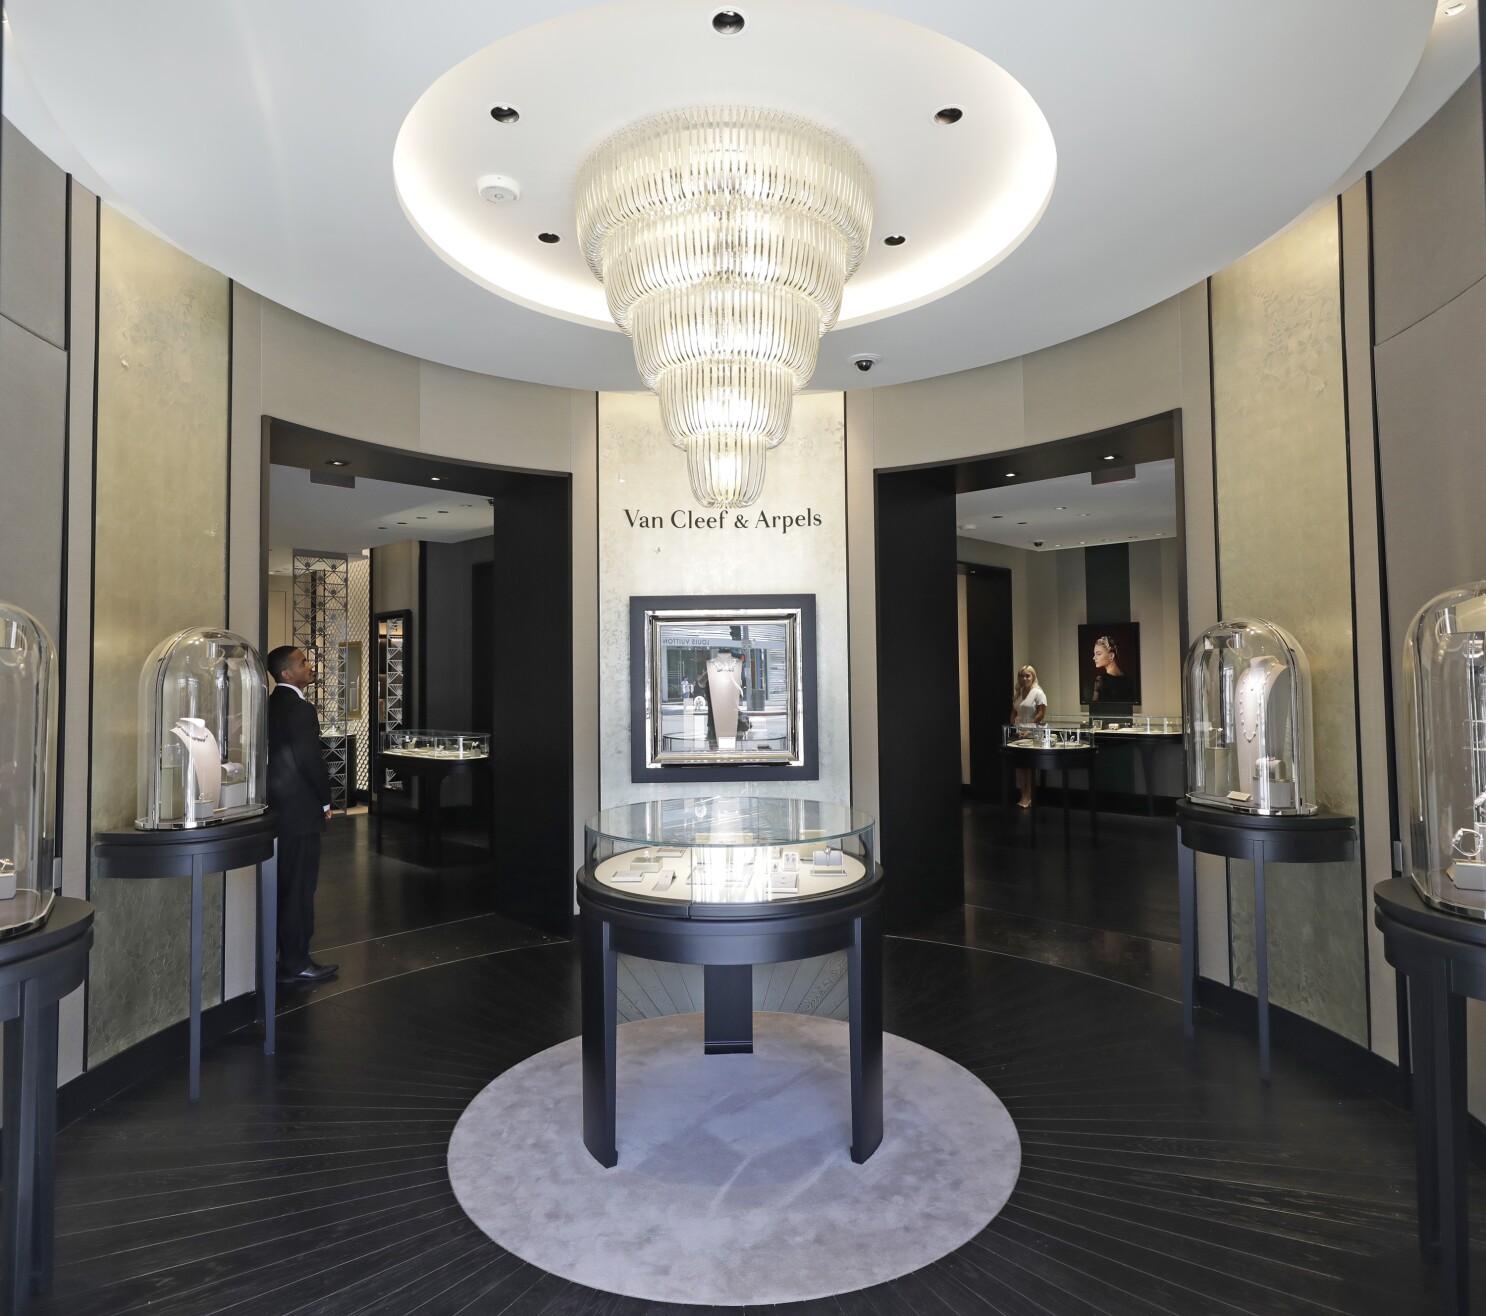 First look: Cleef & unveils renovated jewelry boutique with bar and dining room - Los Angeles